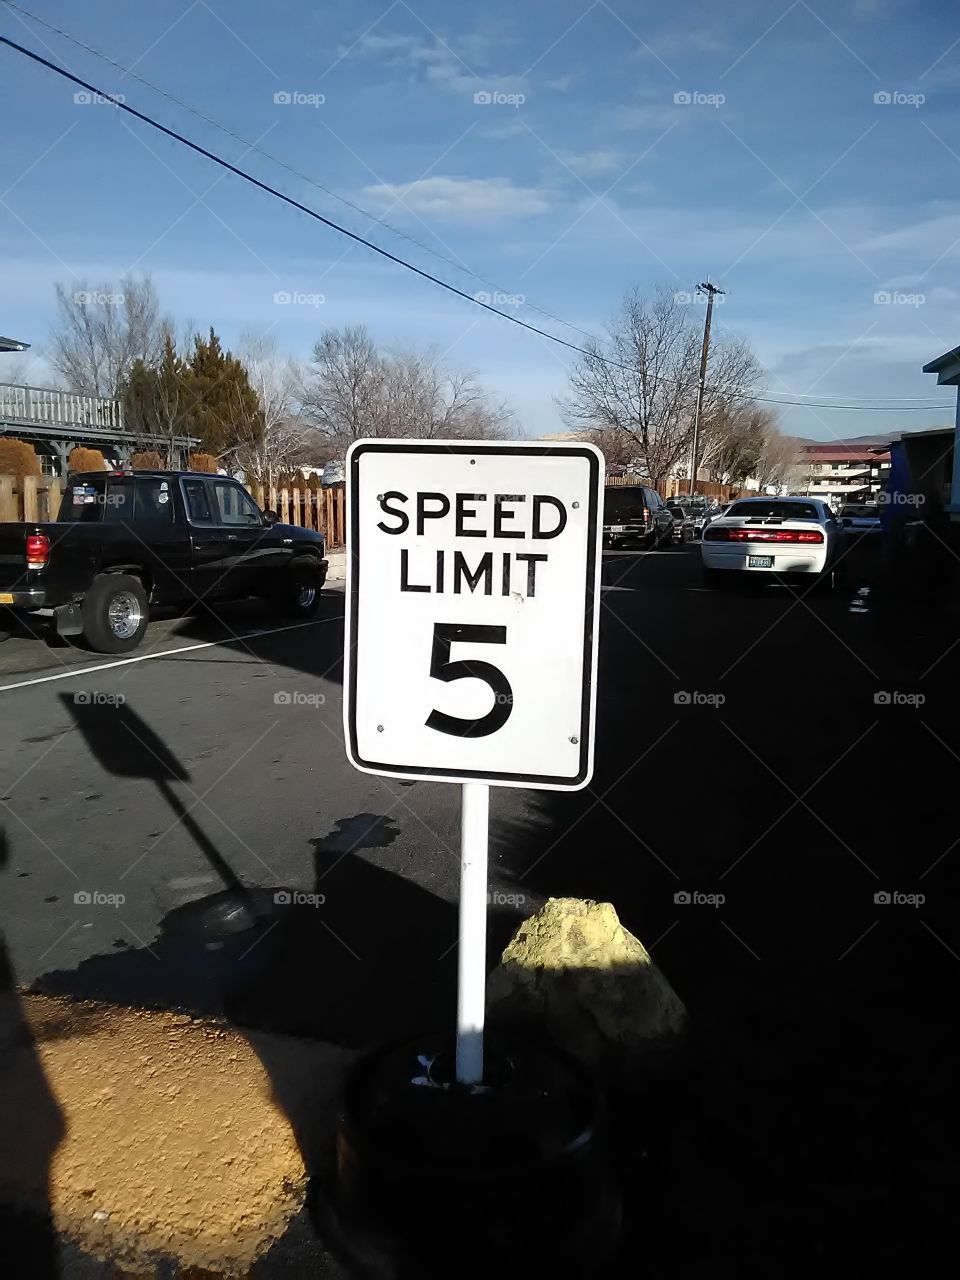 Speed Limit 5 road sign